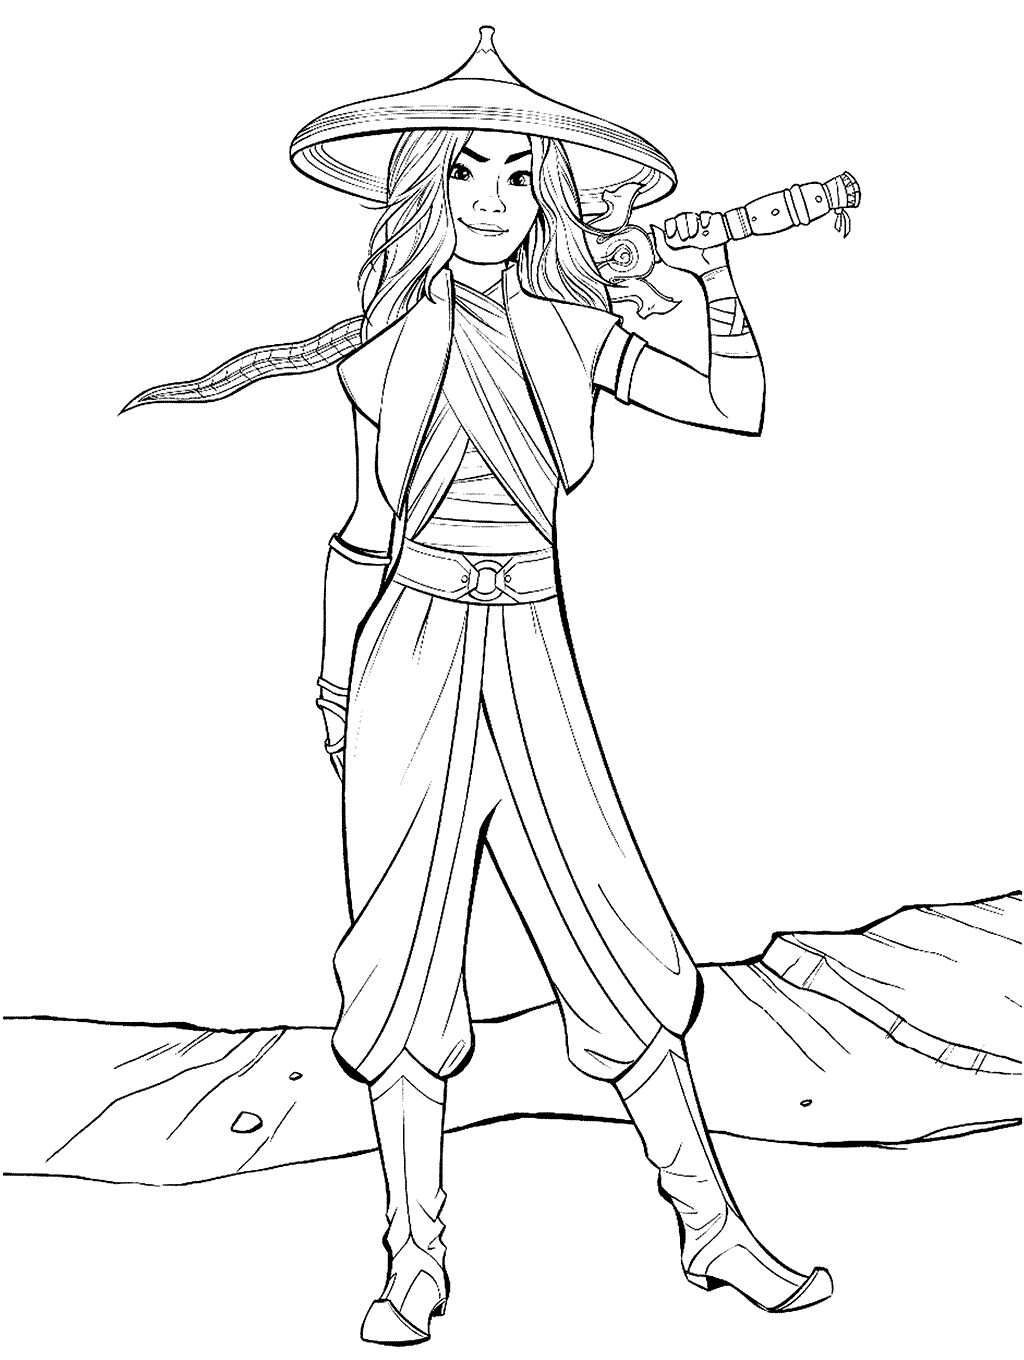 Warrior Raya holds her sword Coloring Pages Cartoons Coloring Pages